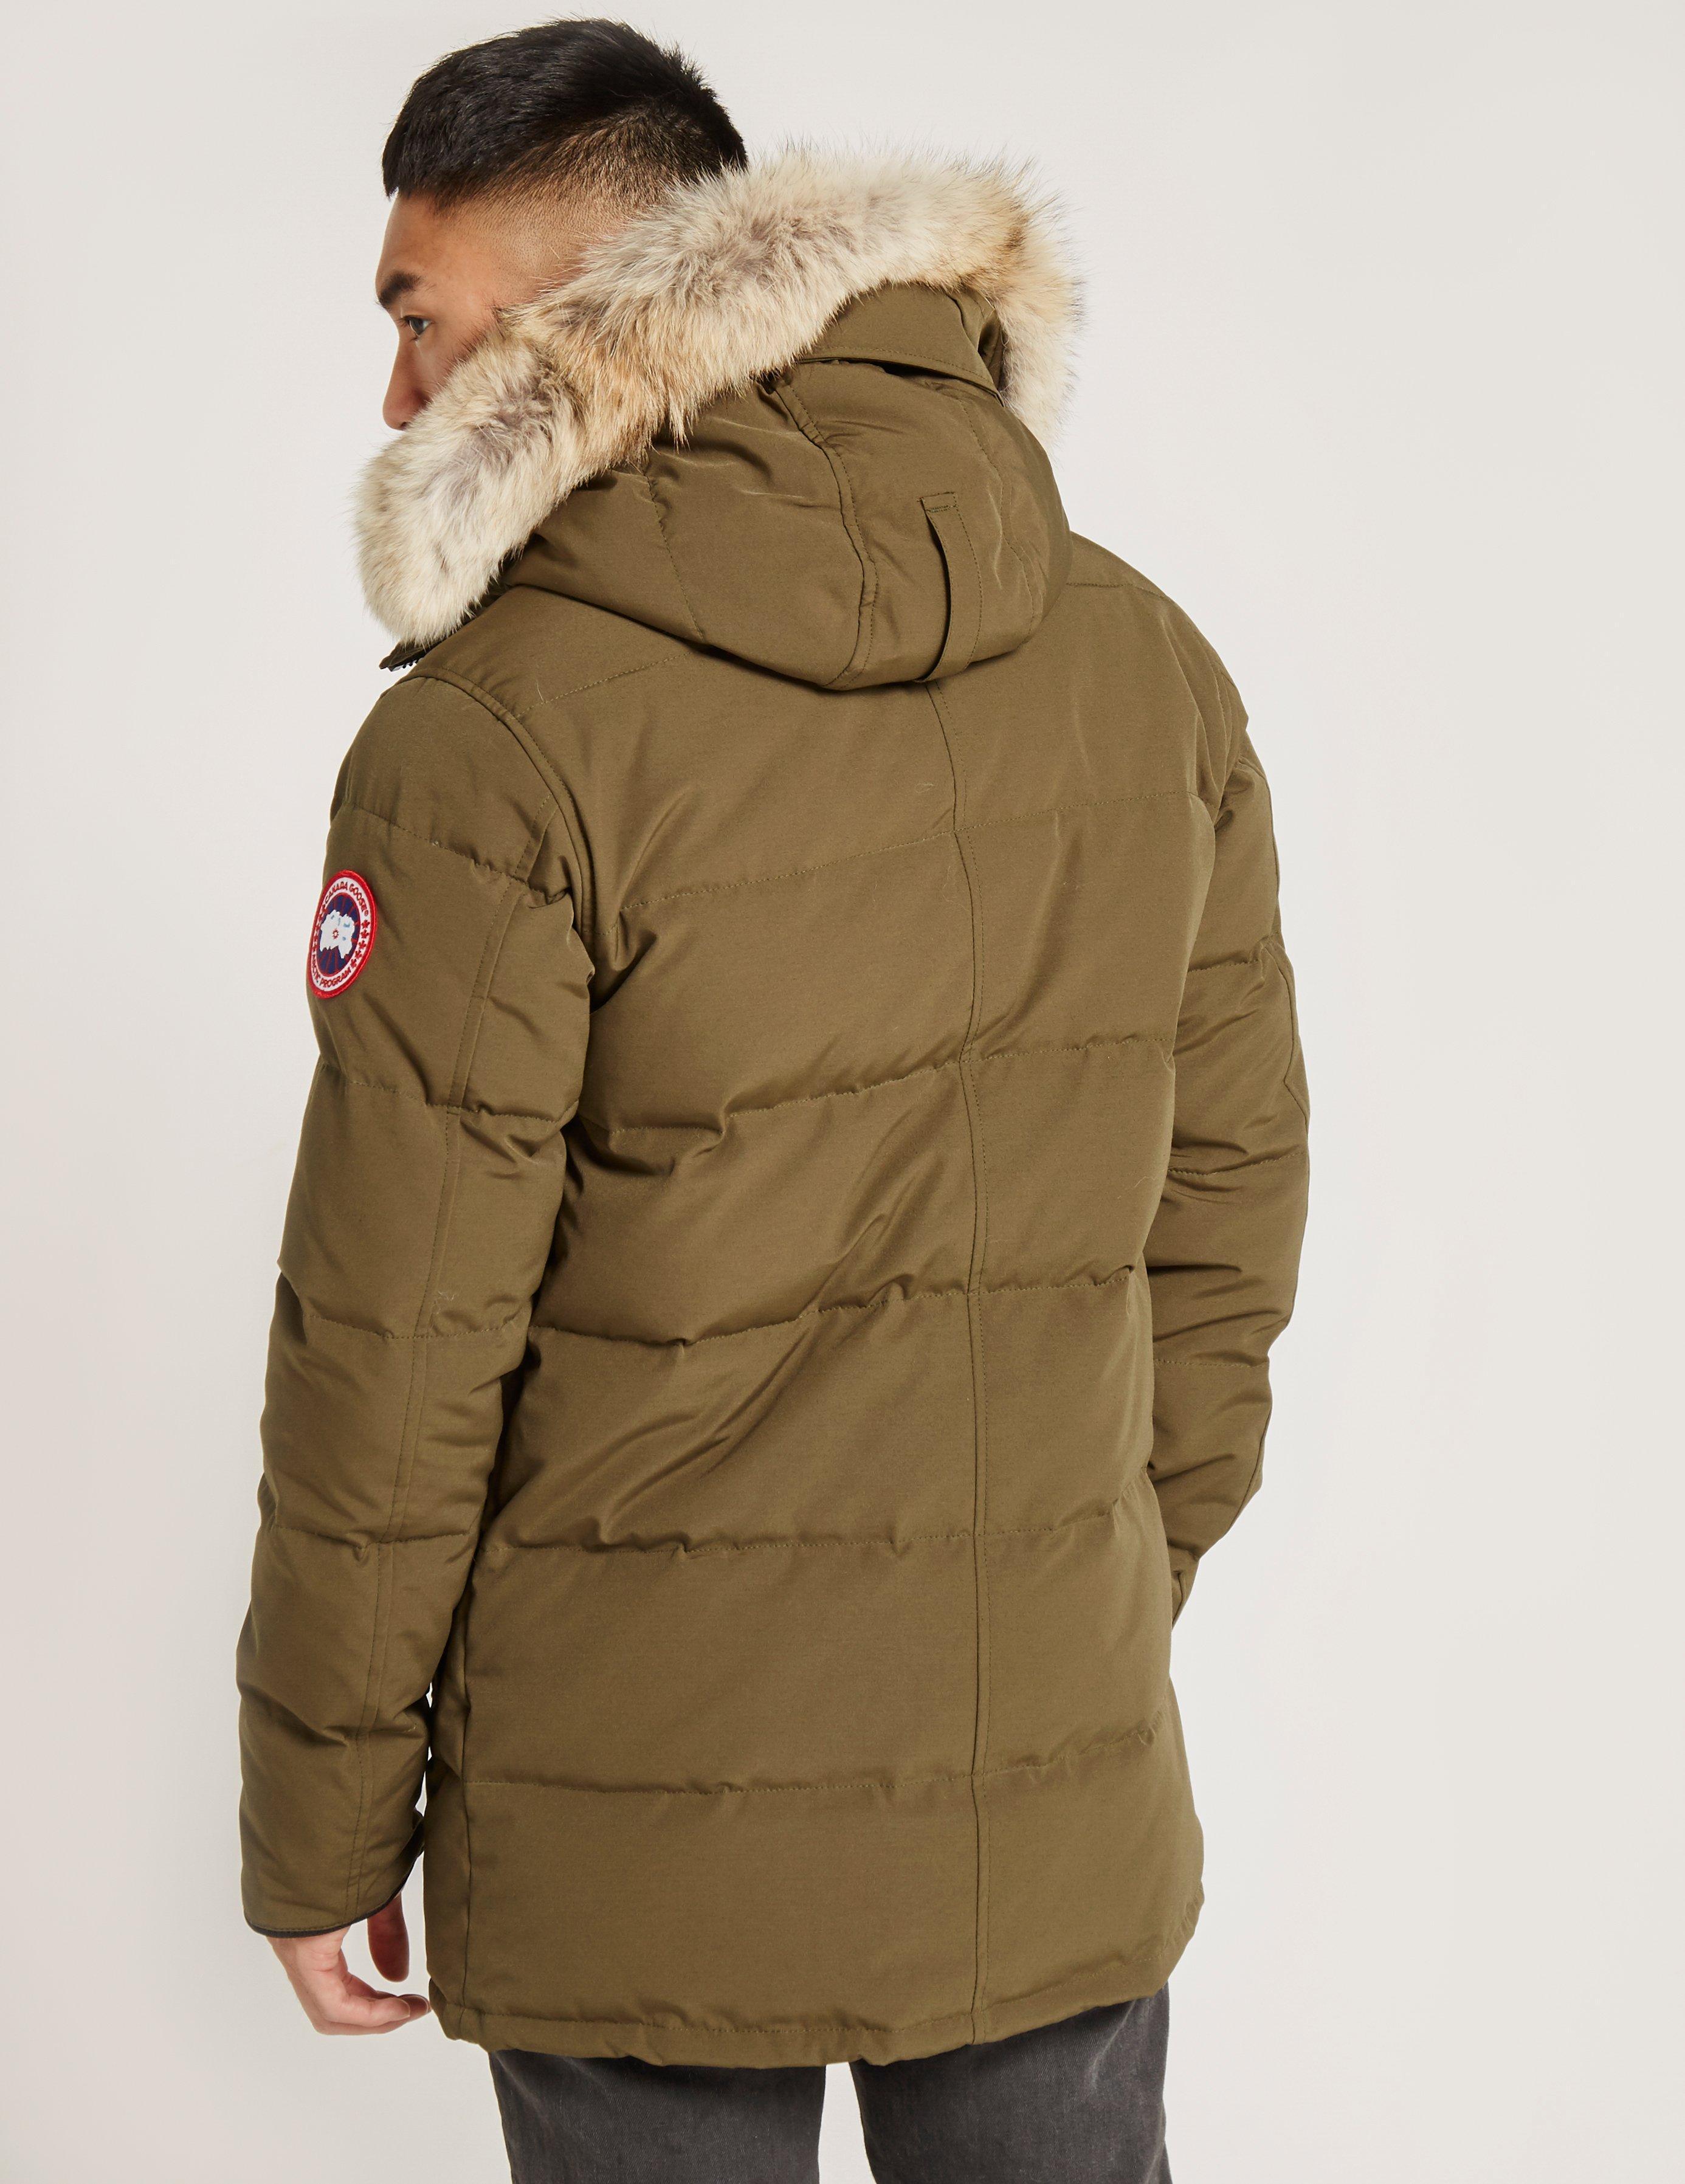 Canada Goose Goose Carson Parka - Online Exclusive Green for Men - Lyst